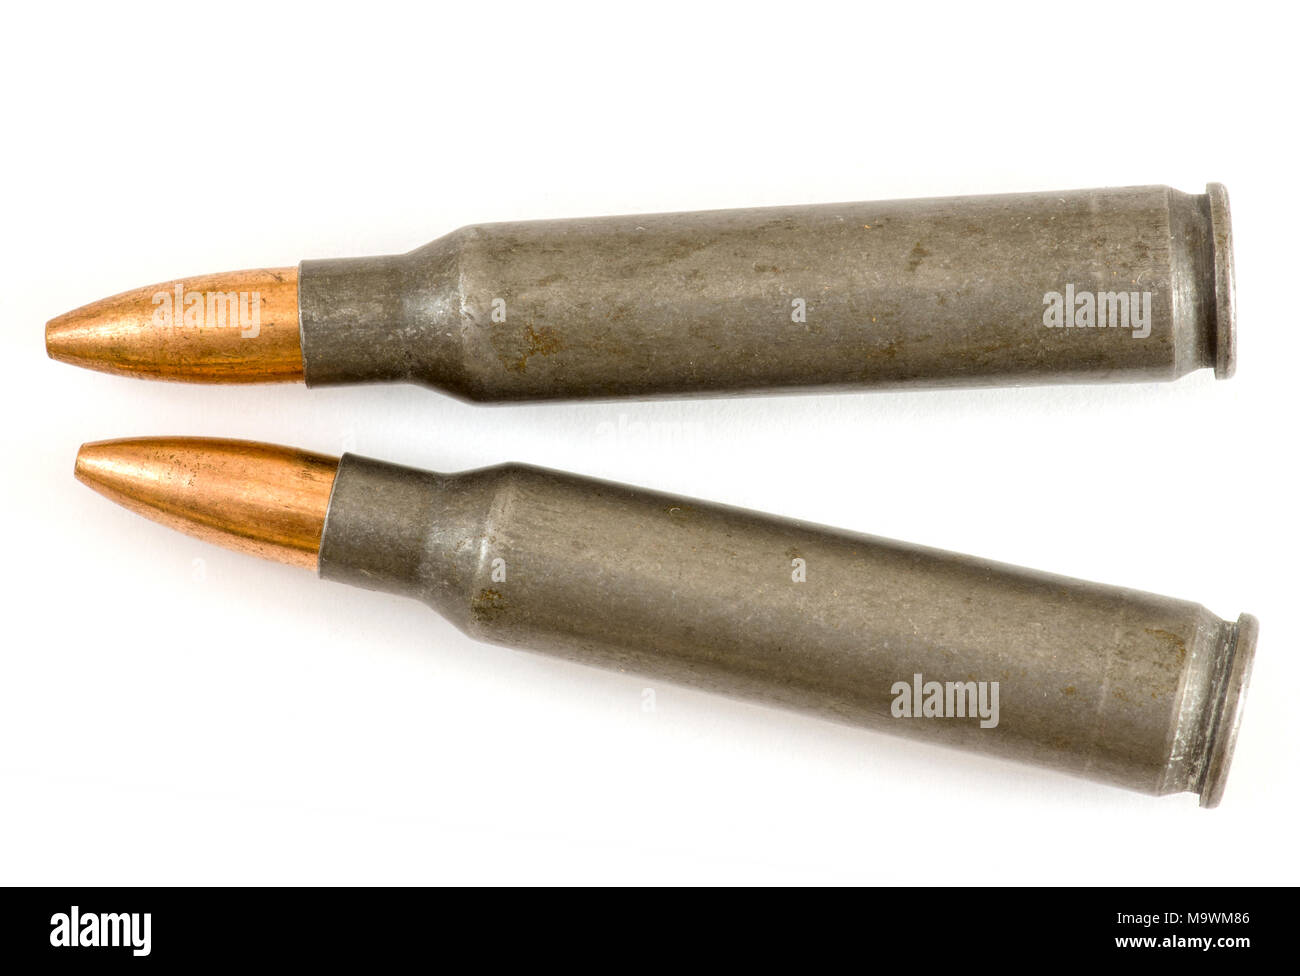 Pair of 7.62x45mm (.223) rounds. Stock Photo